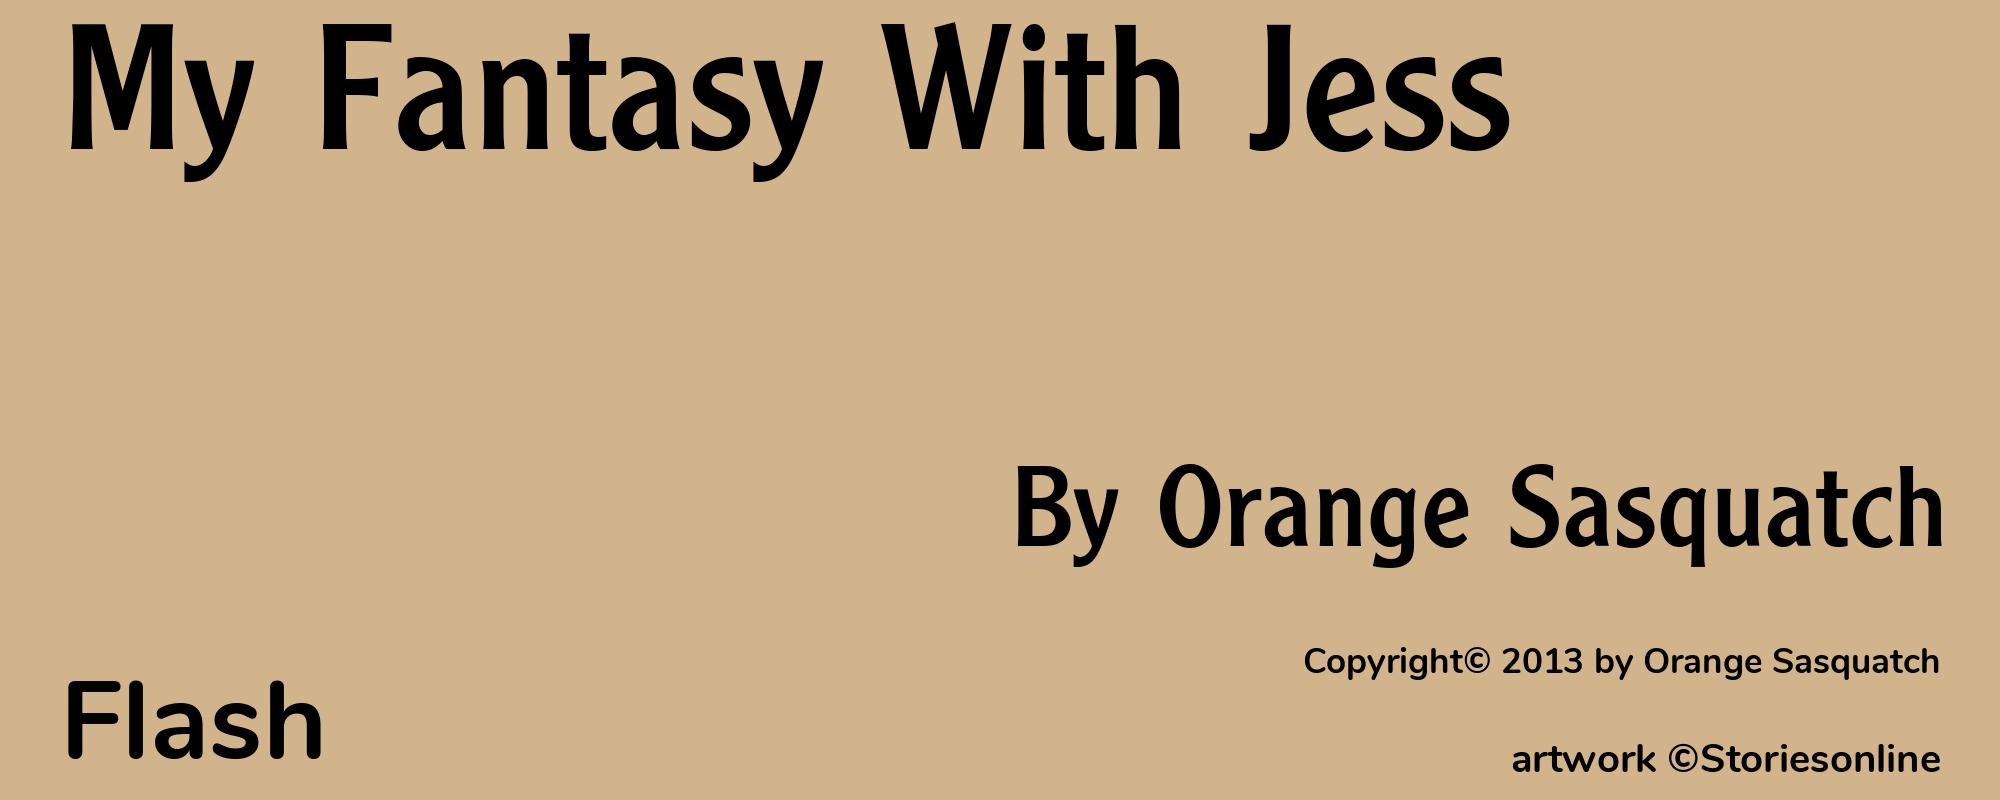 My Fantasy With Jess - Cover